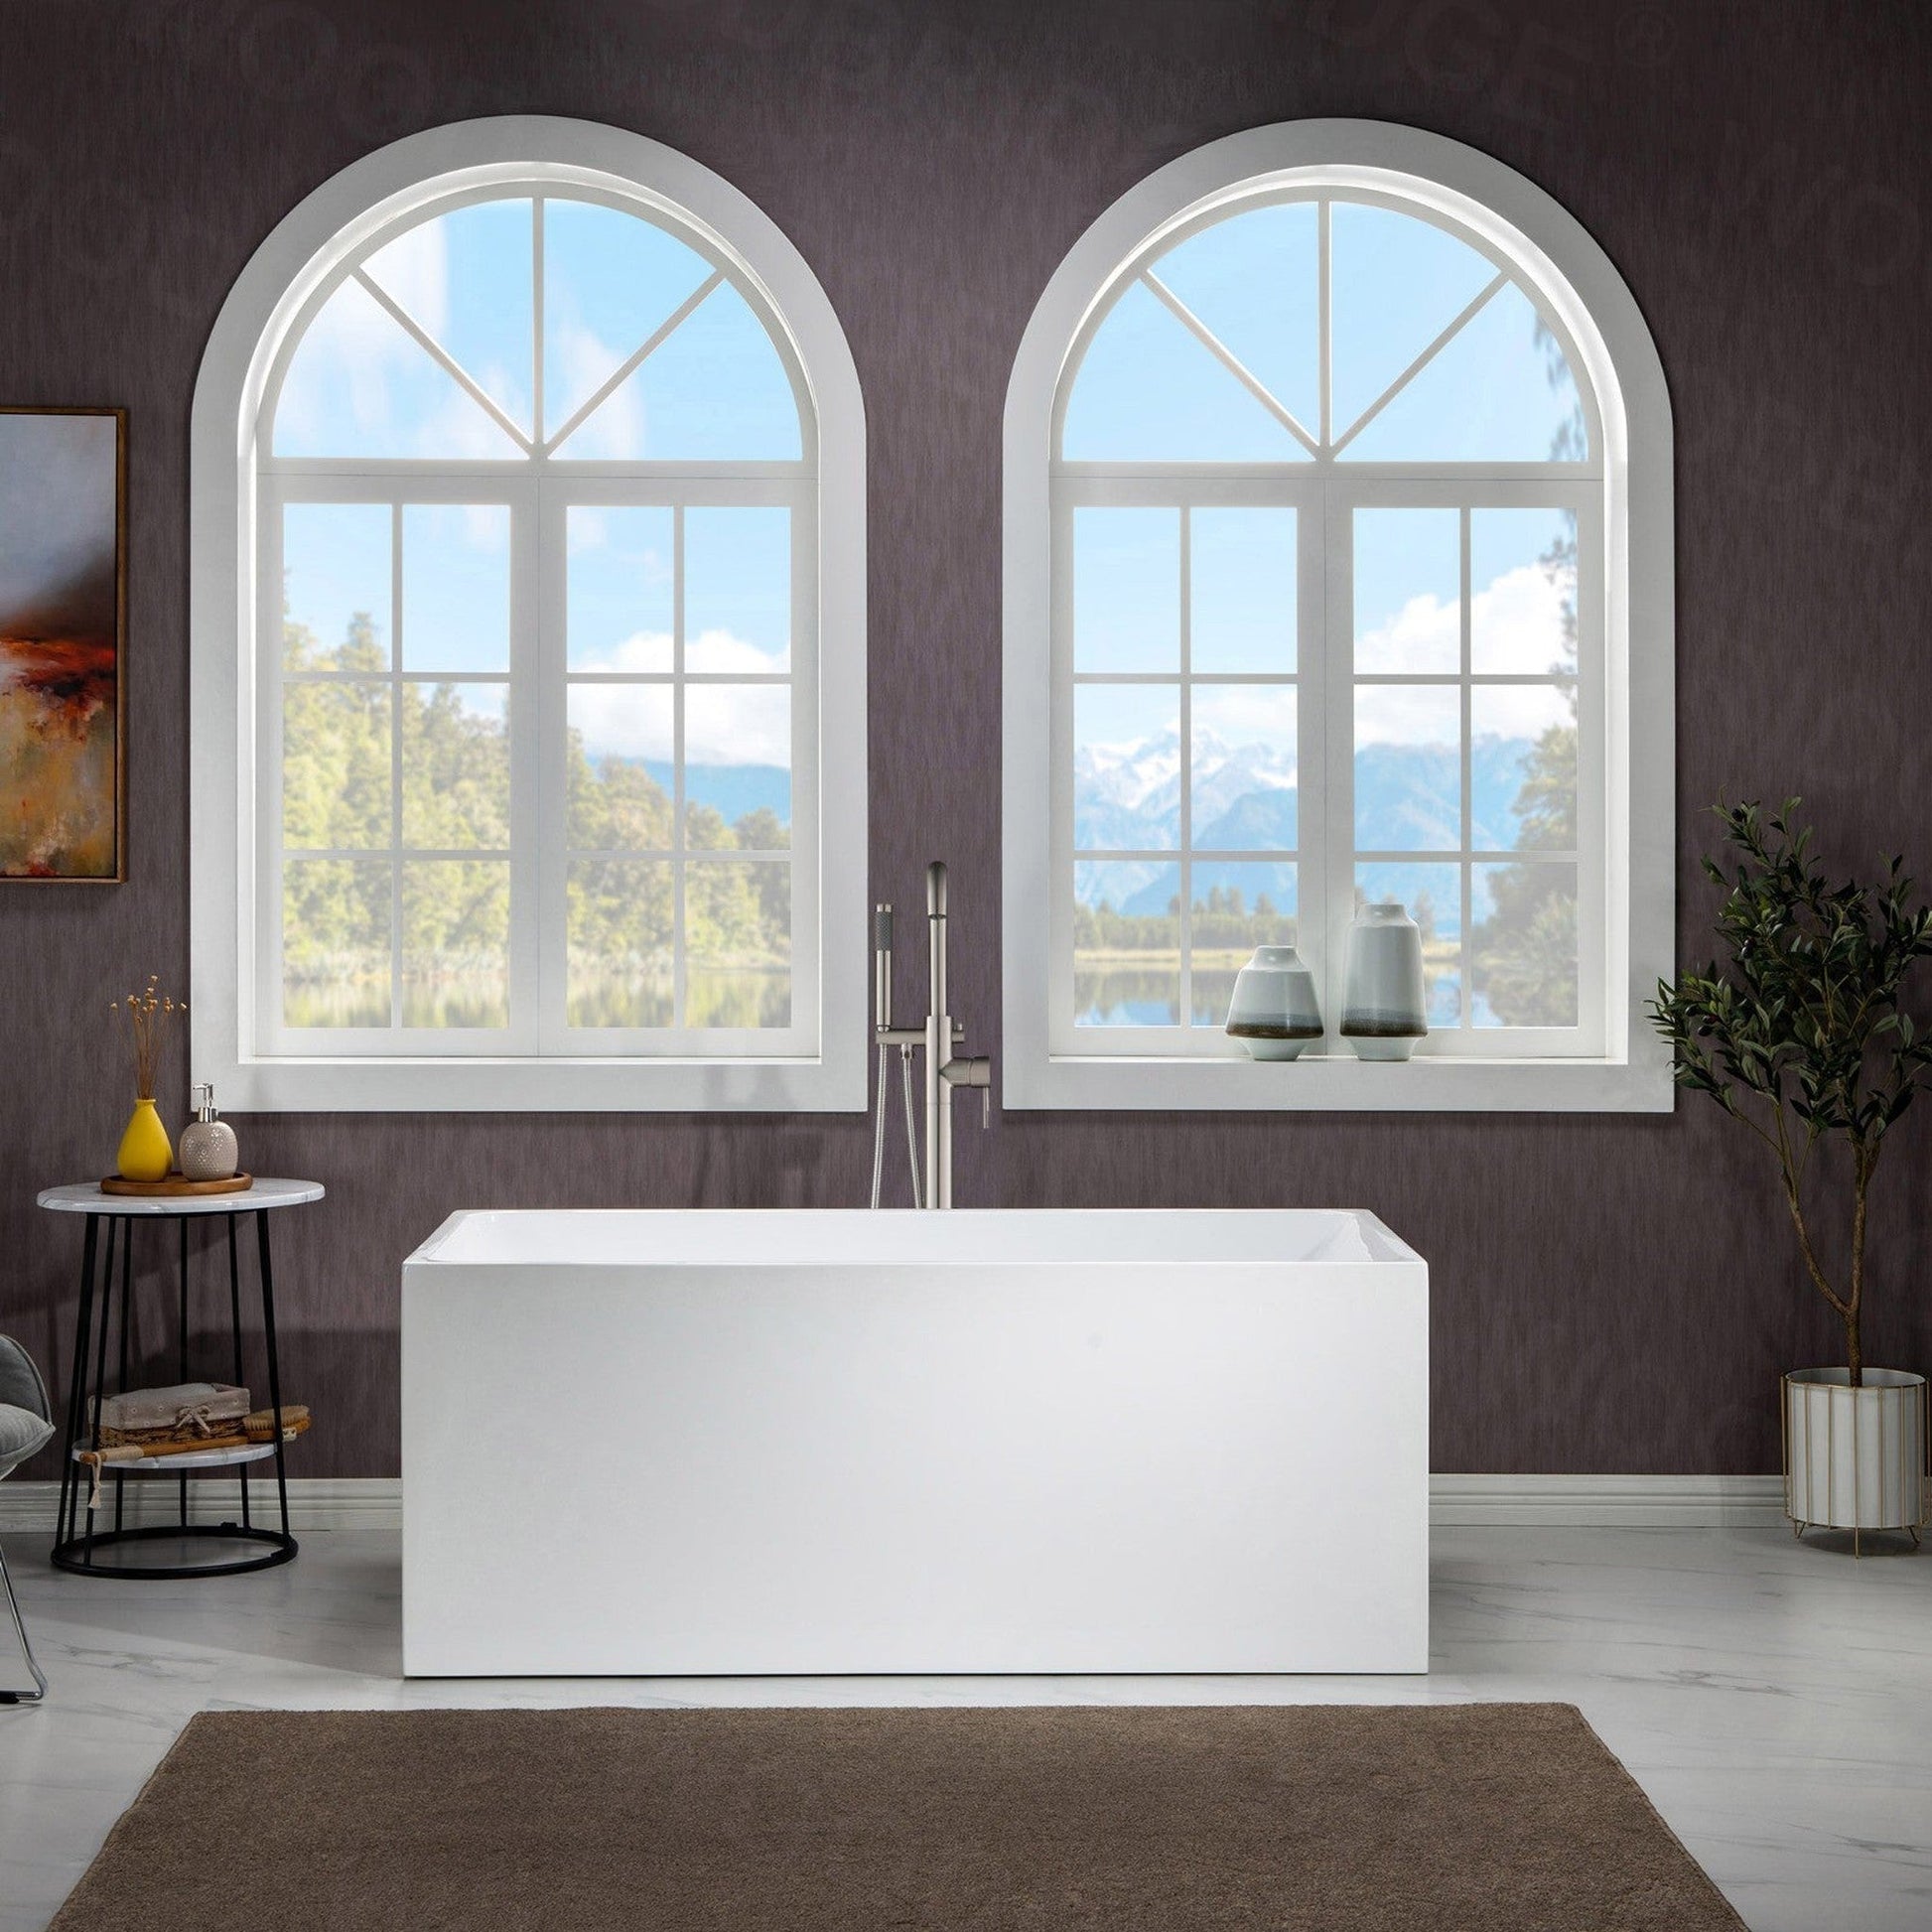 WoodBridge B-0086 67" White Acrylic Freestanding Soaking Bathtub With Brushed Nickel Drain, Overflow, F0070BNVT Tub Filler and Caddy Tray